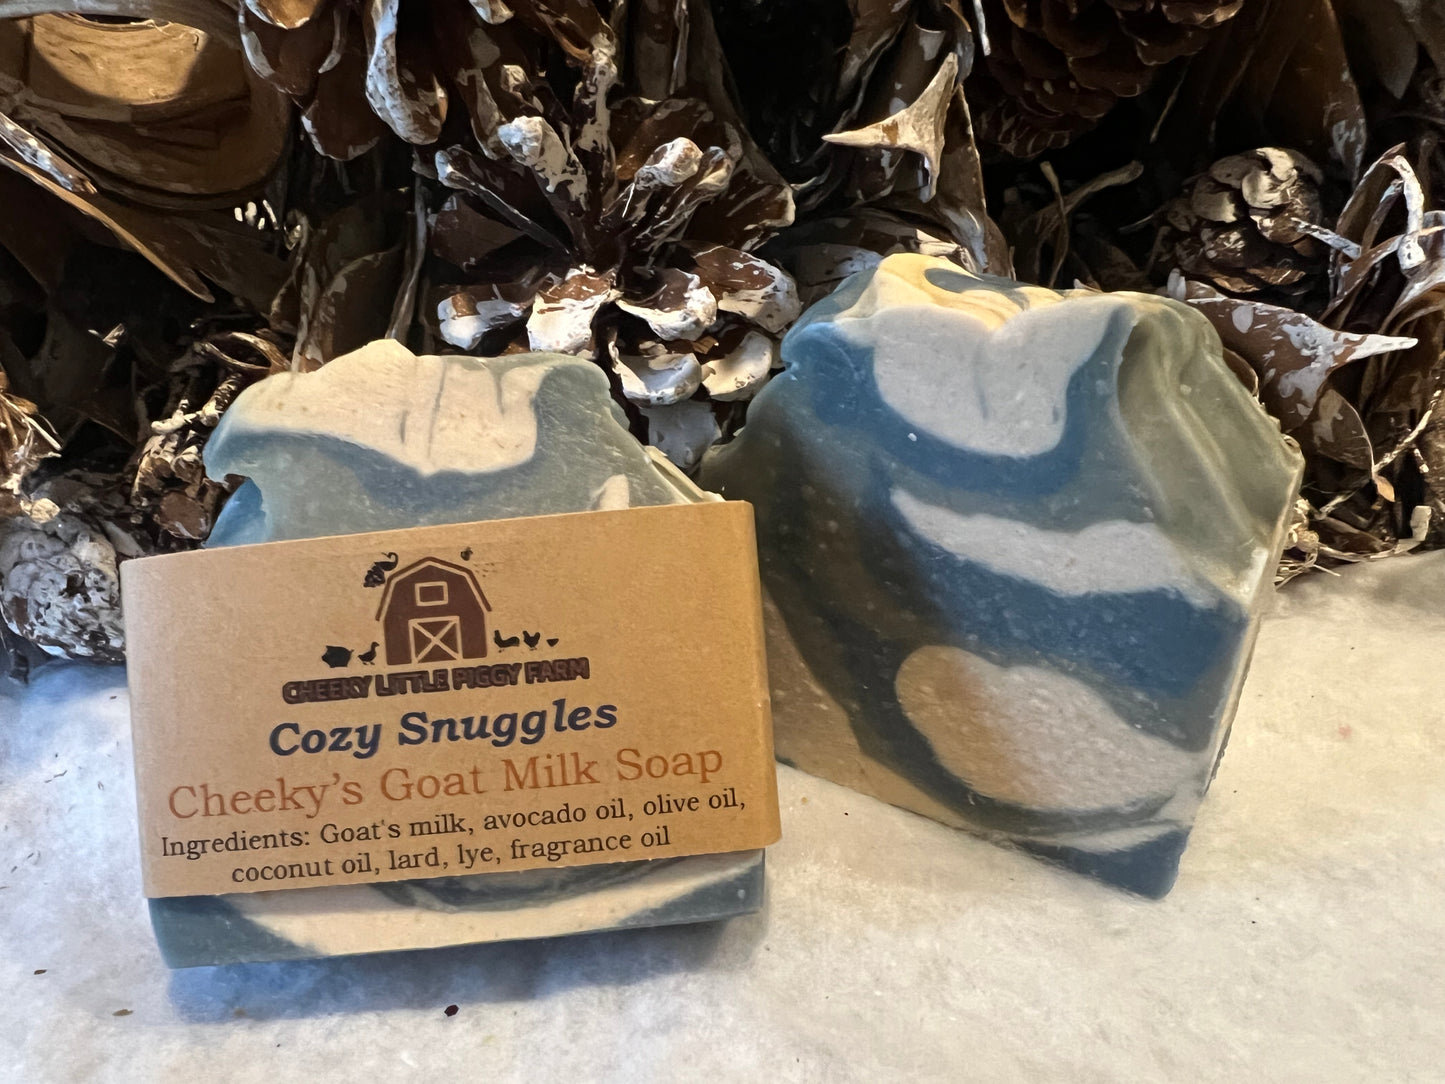 Cozy Snuggles - Handcrafted Goat Milk Soap